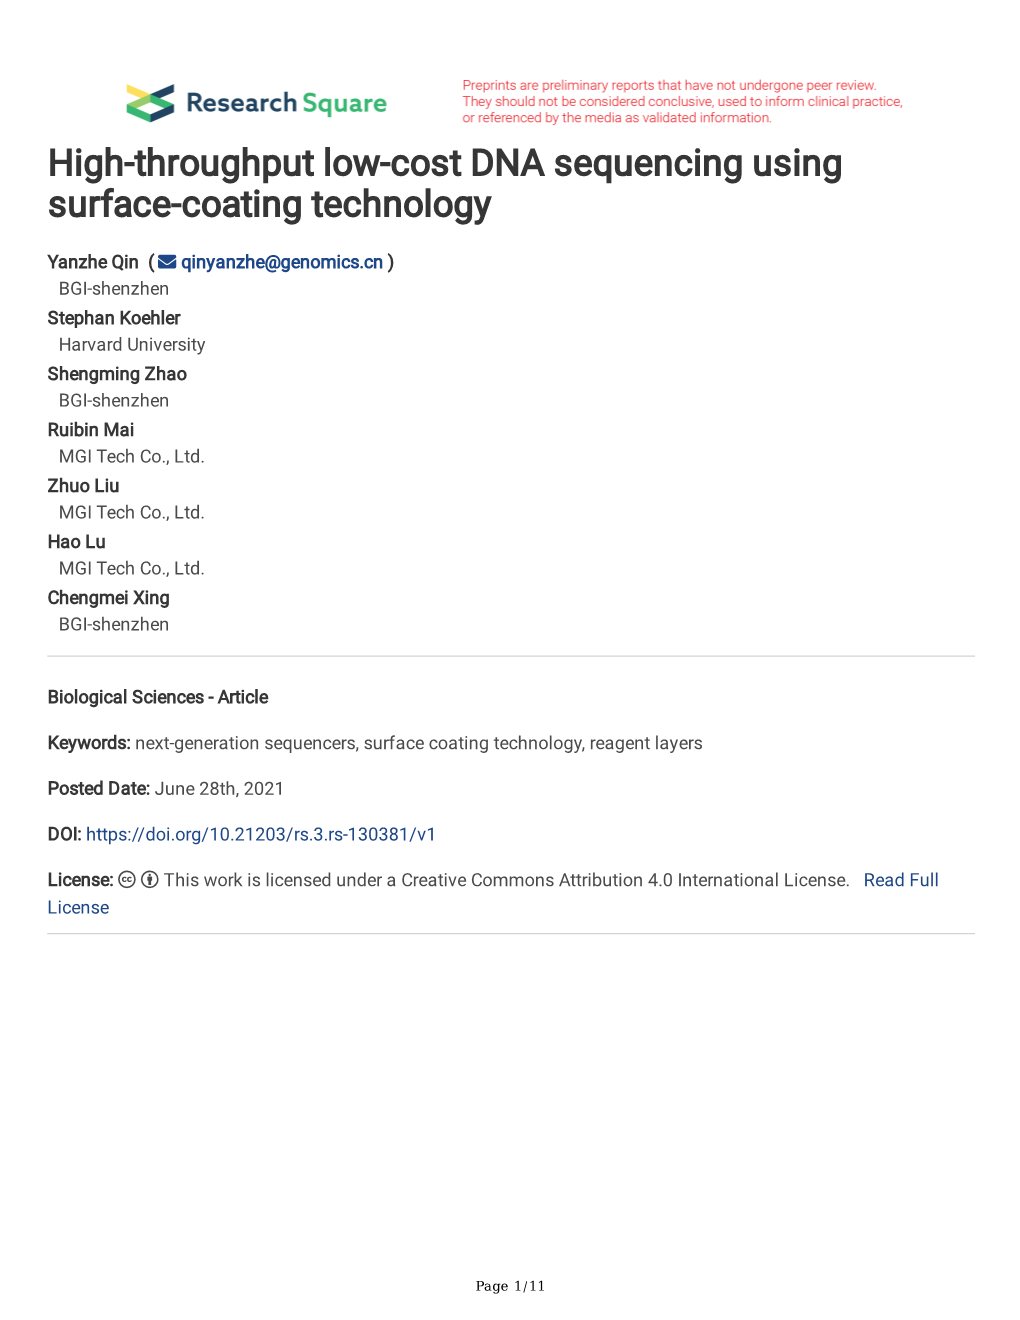 High-Throughput Low-Cost DNA Sequencing Using Surface-Coating Technology